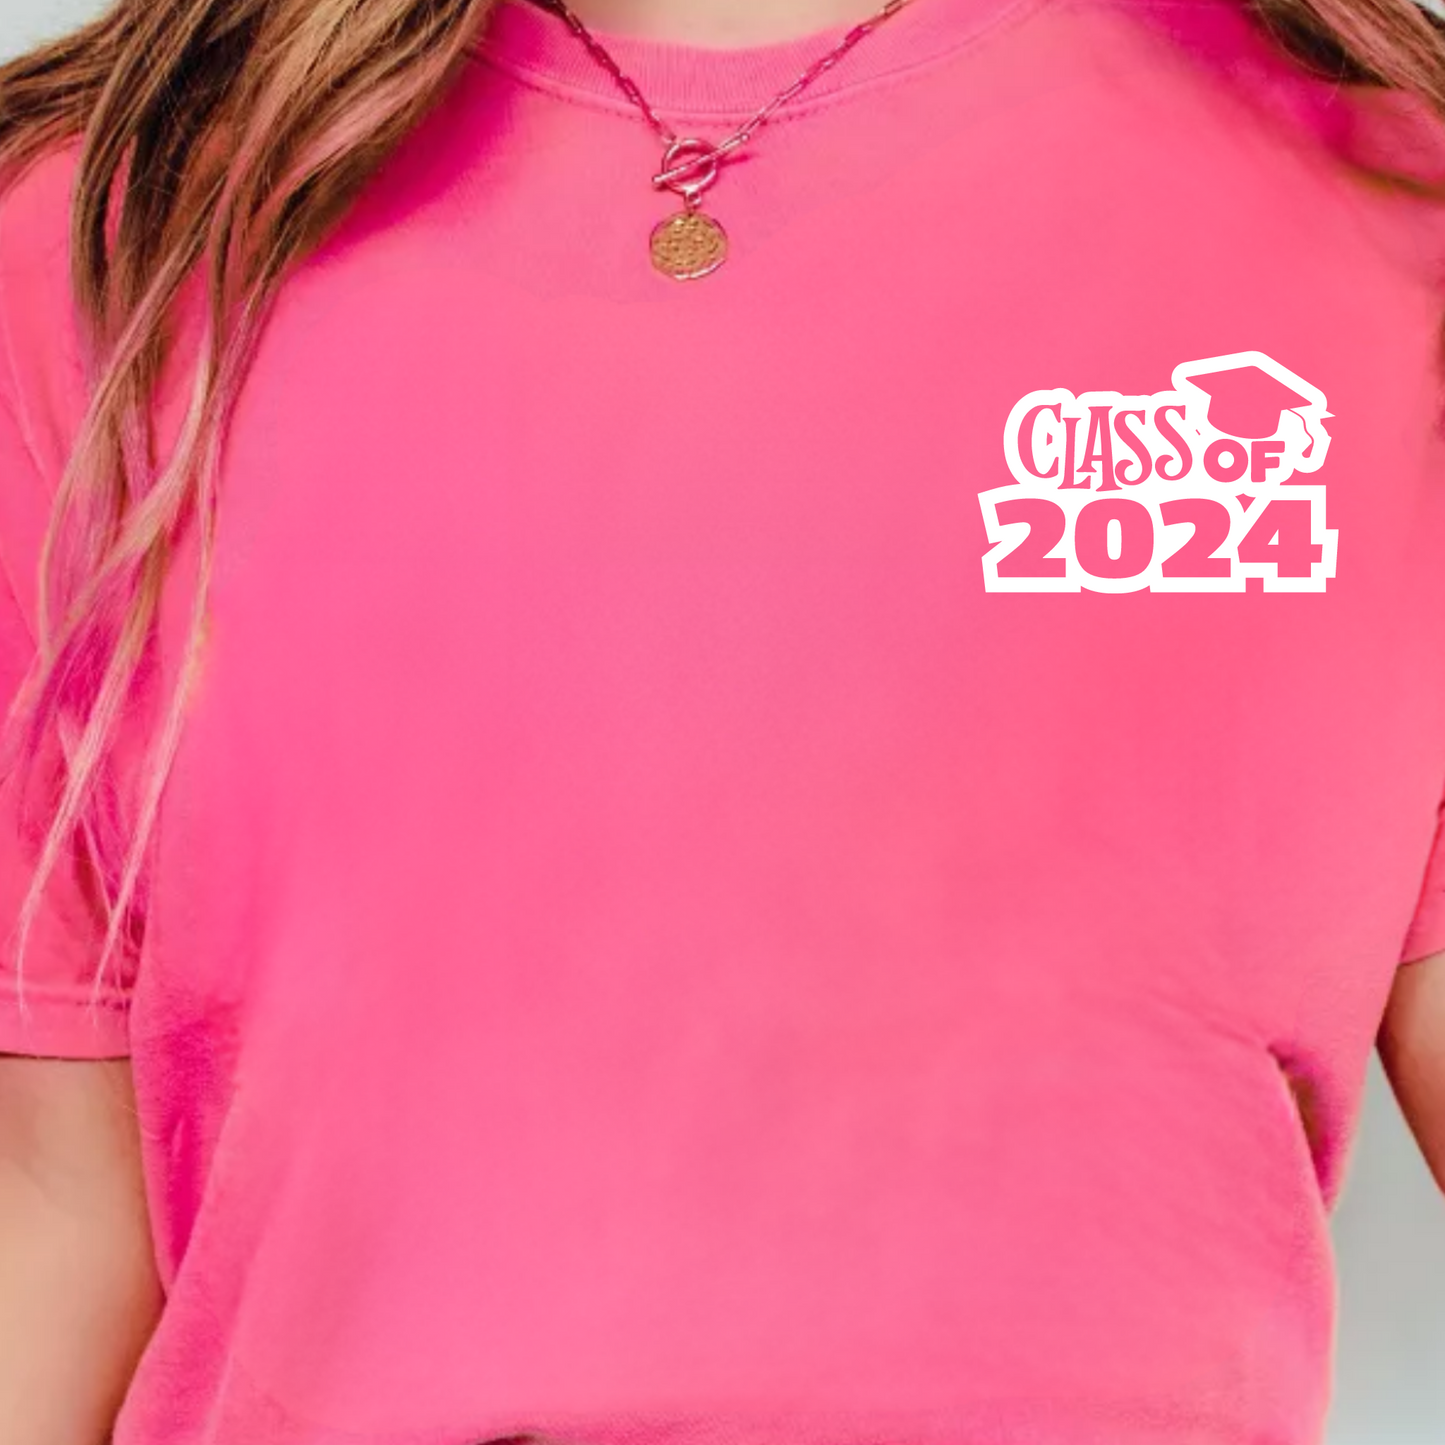 (Shirt not included) Class of 2024 POCKET - Clear Film Transfer